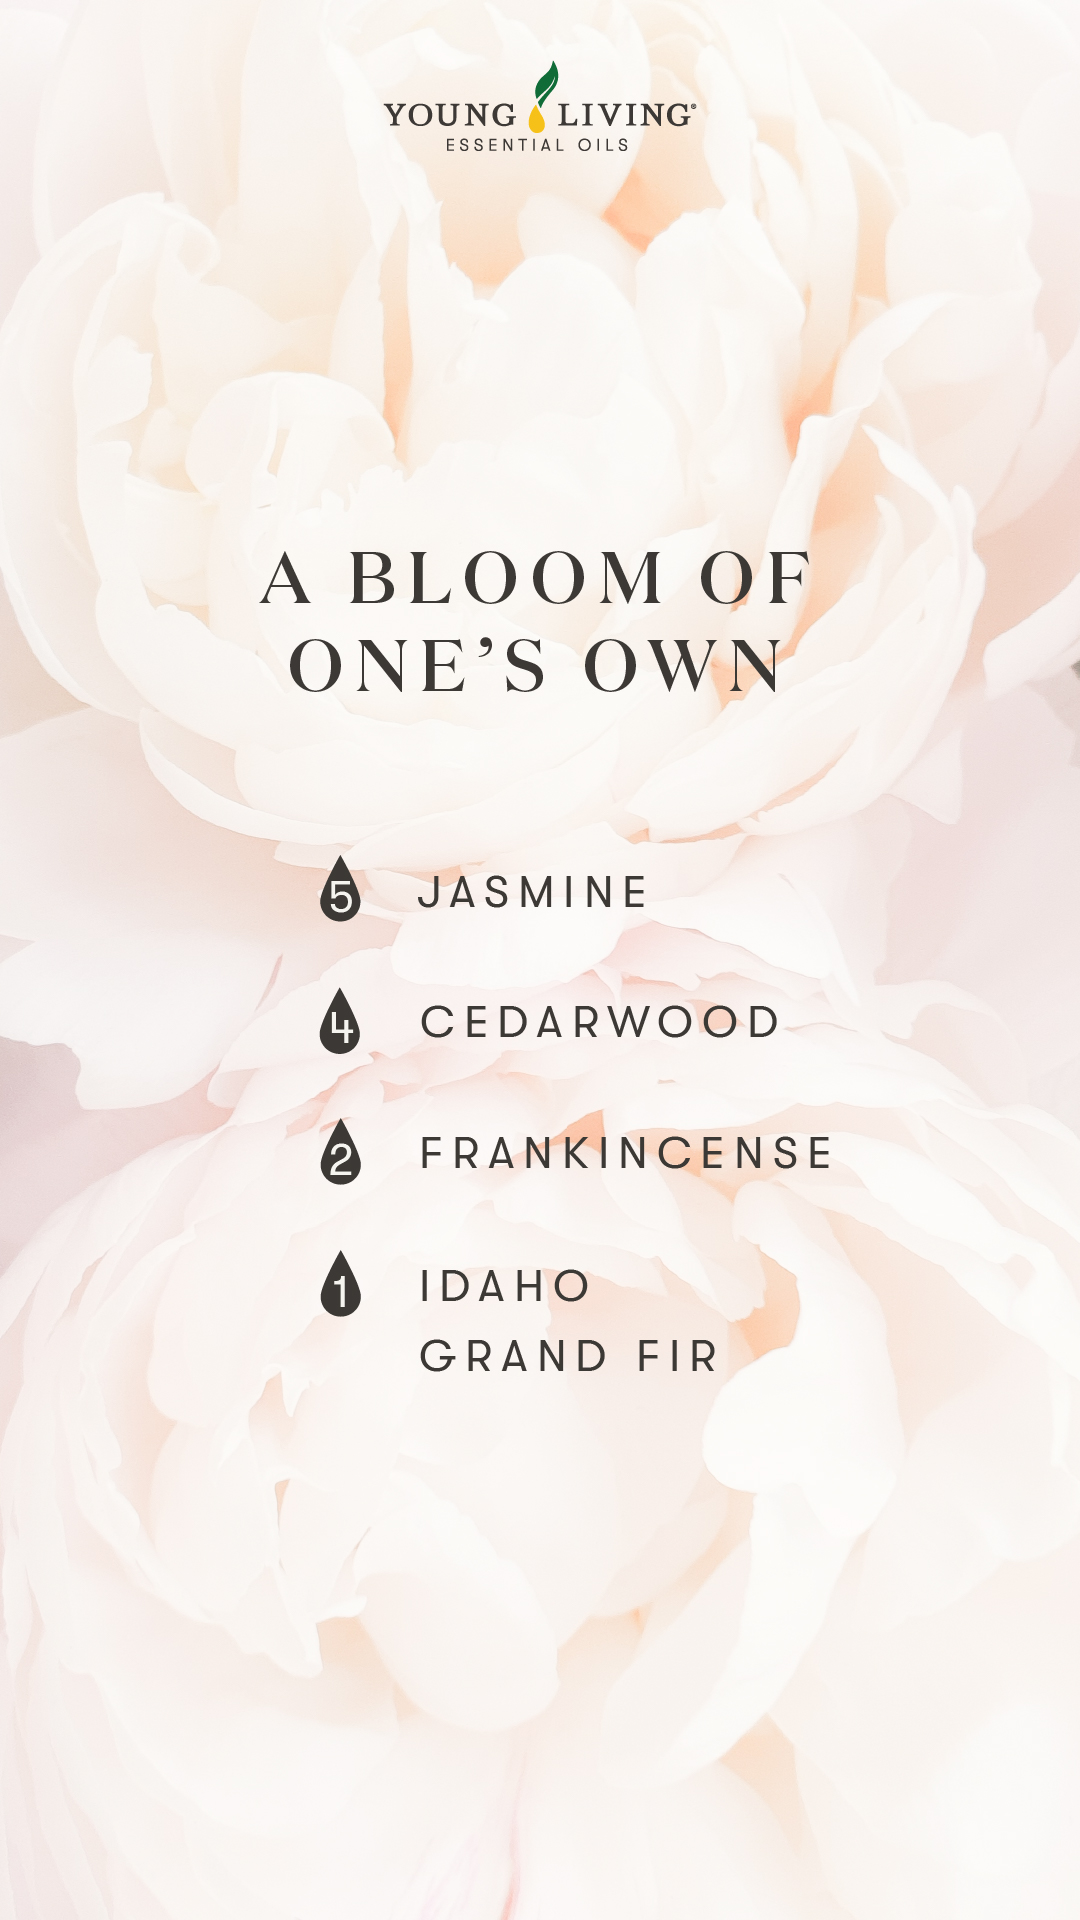 A bloom of one's own diffuser blend